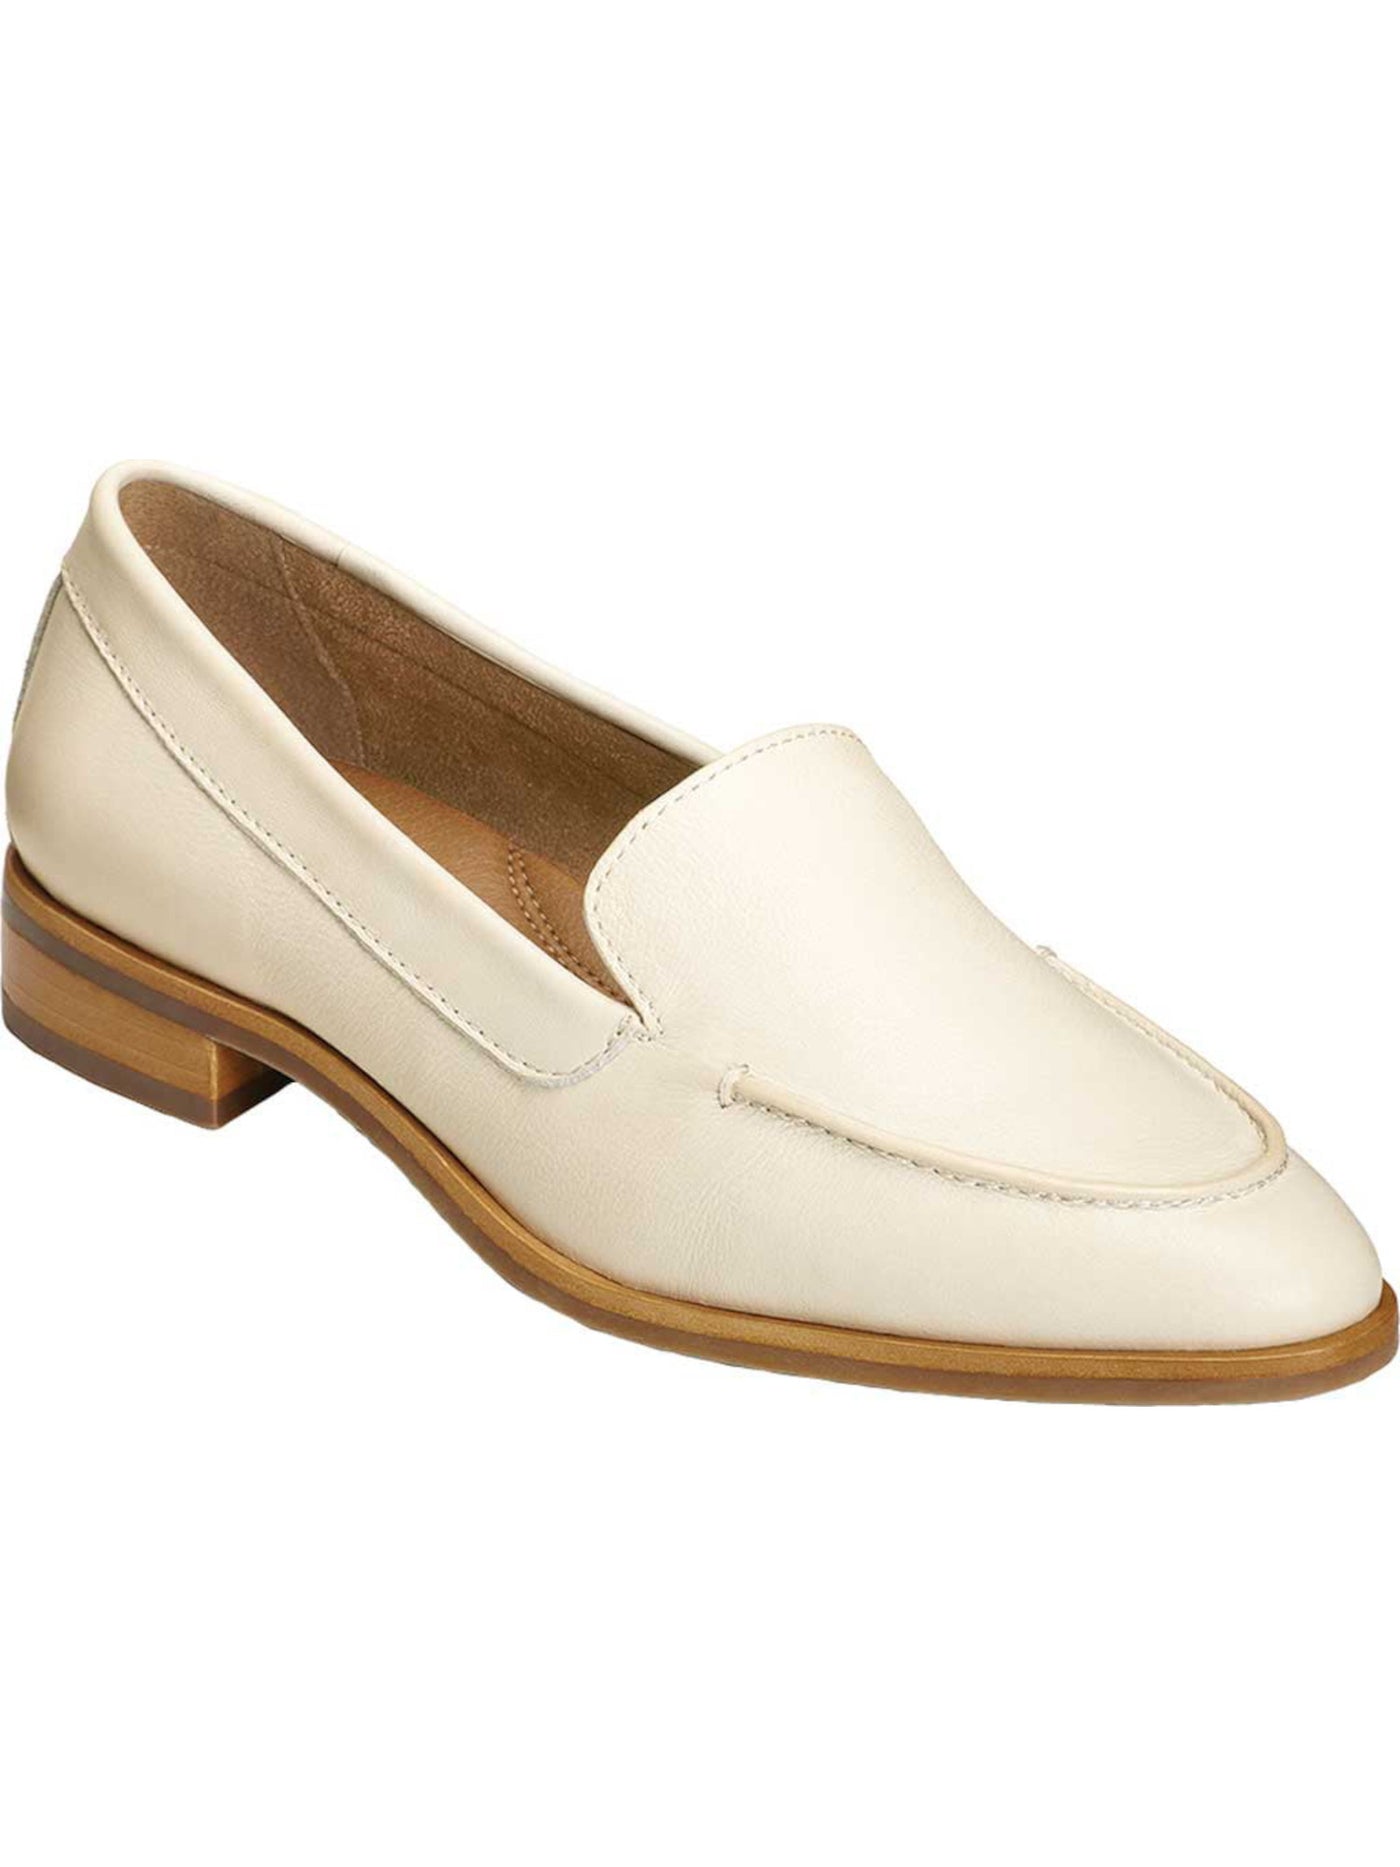 AEROSOLES Womens Ivory Burnished Finish Notched Upper Cushioned East Side Almond Toe Stacked Heel Slip On Leather Loafers 5.5 M